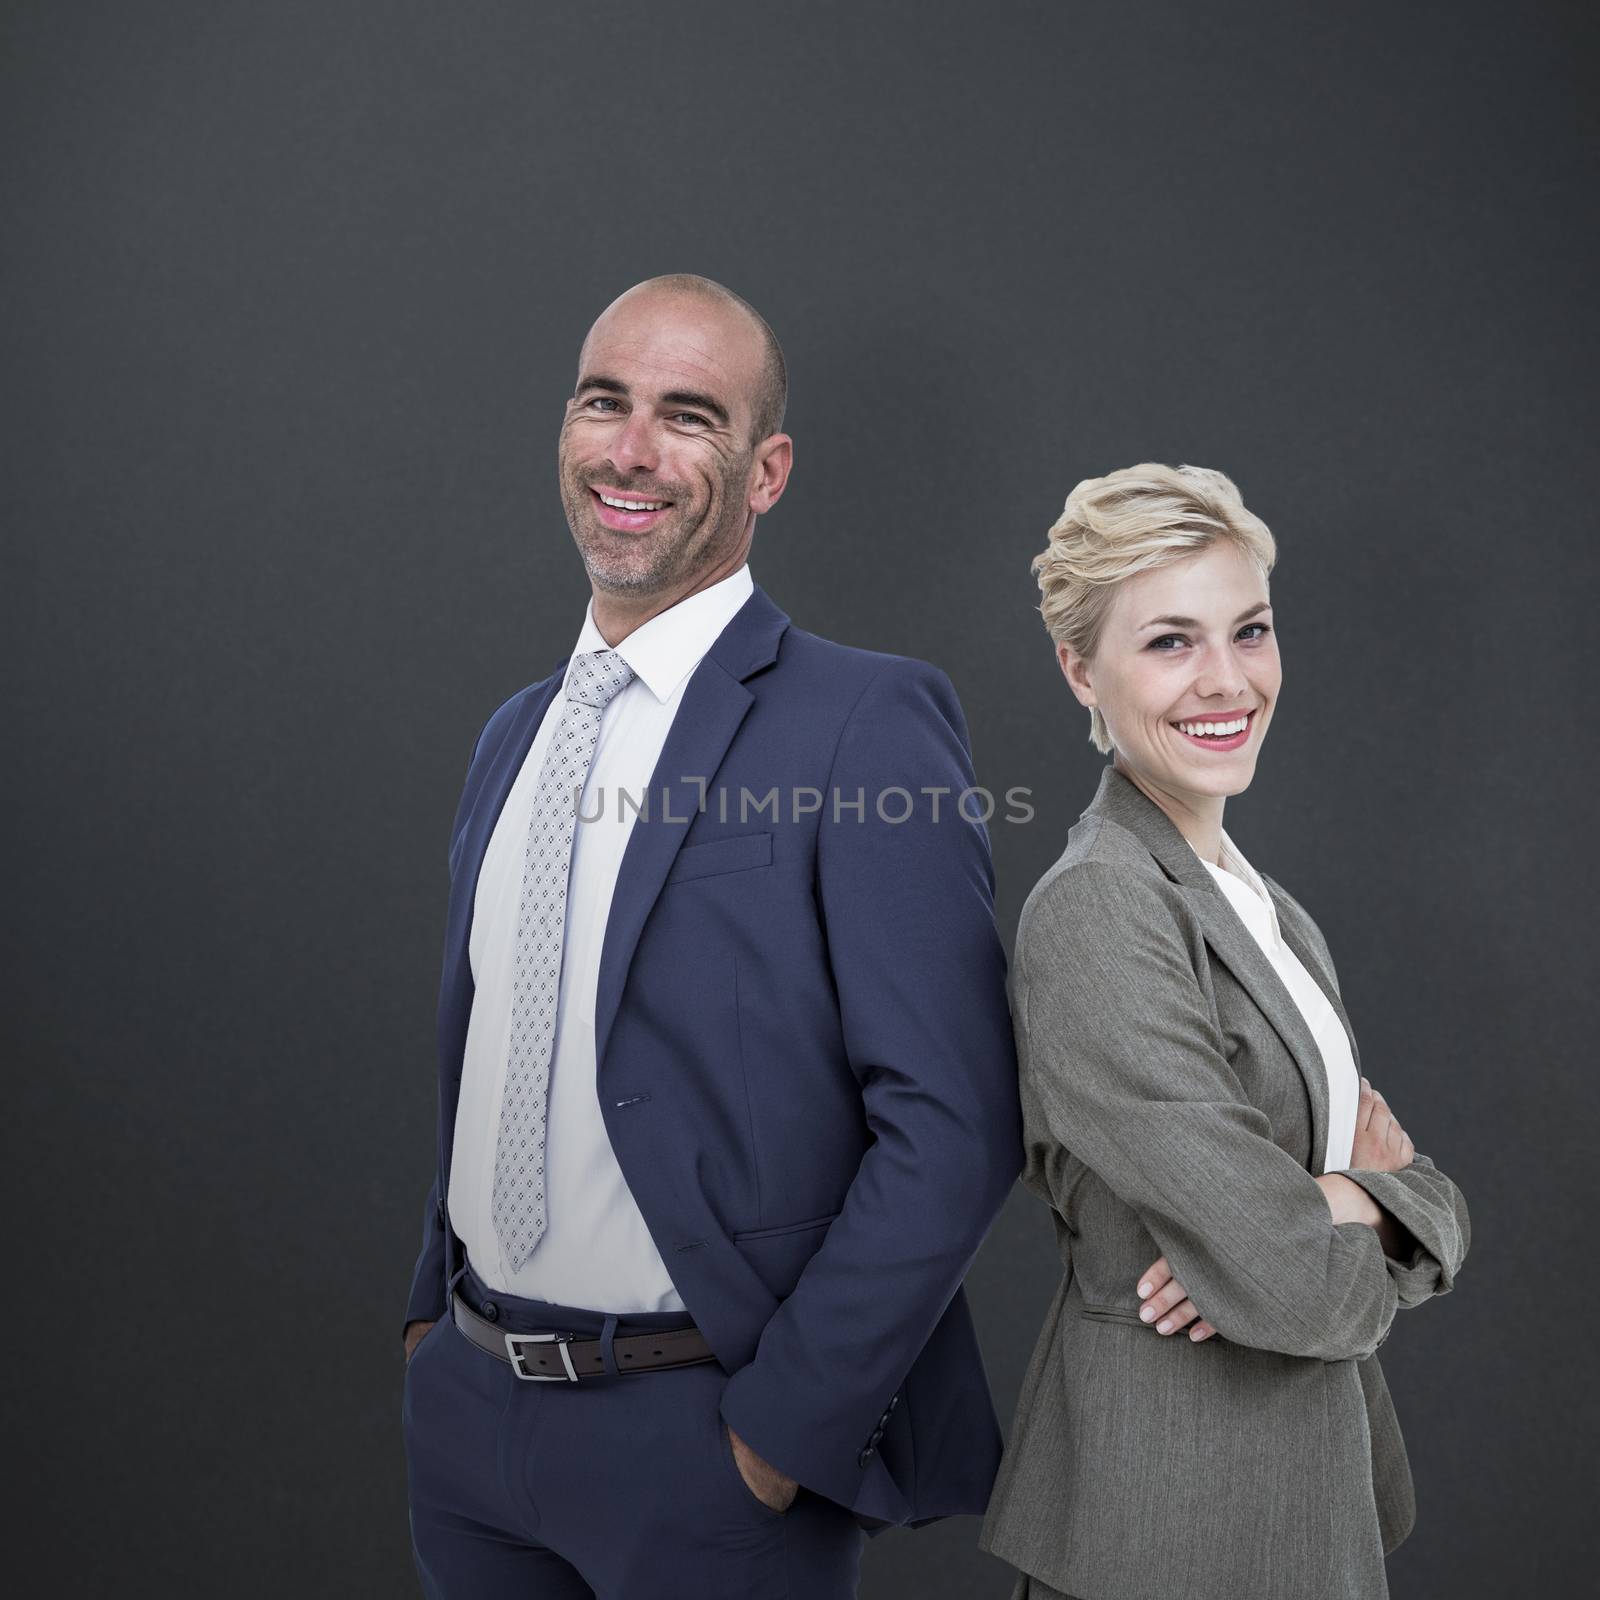 Composite image of  smiling business people back-to-back by Wavebreakmedia